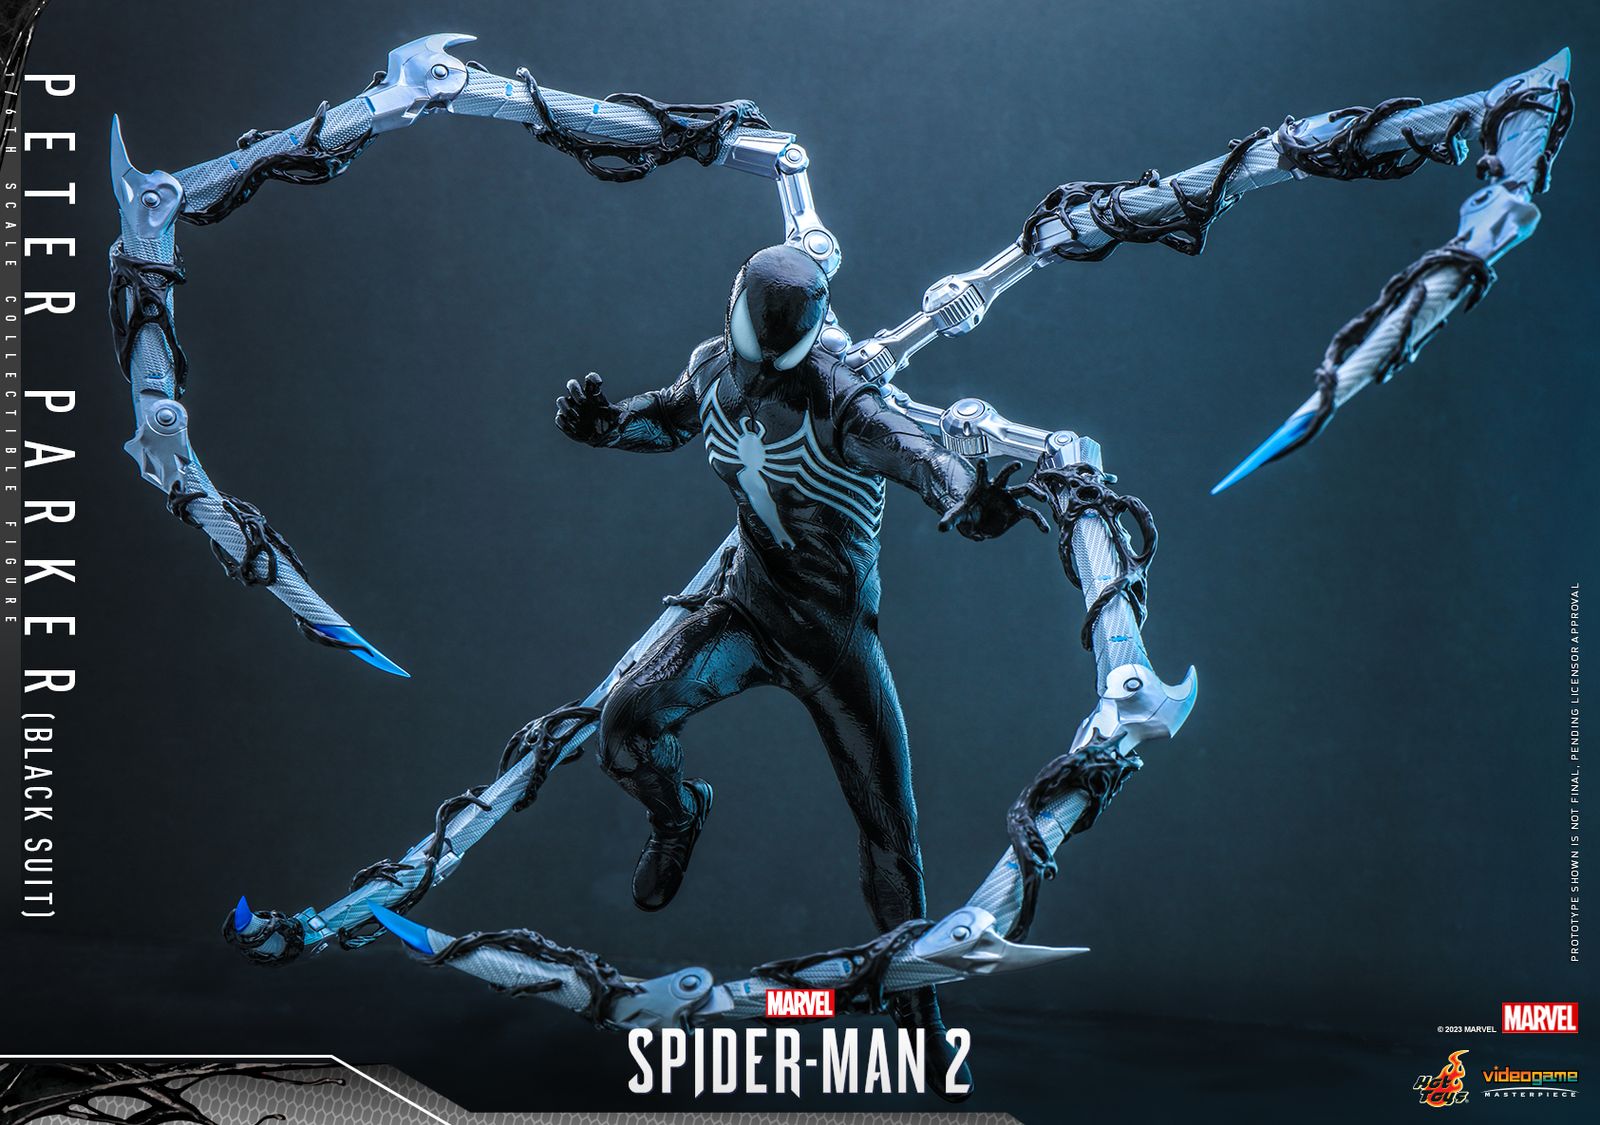 Symbiote Spider-Man brings out the tentacles.